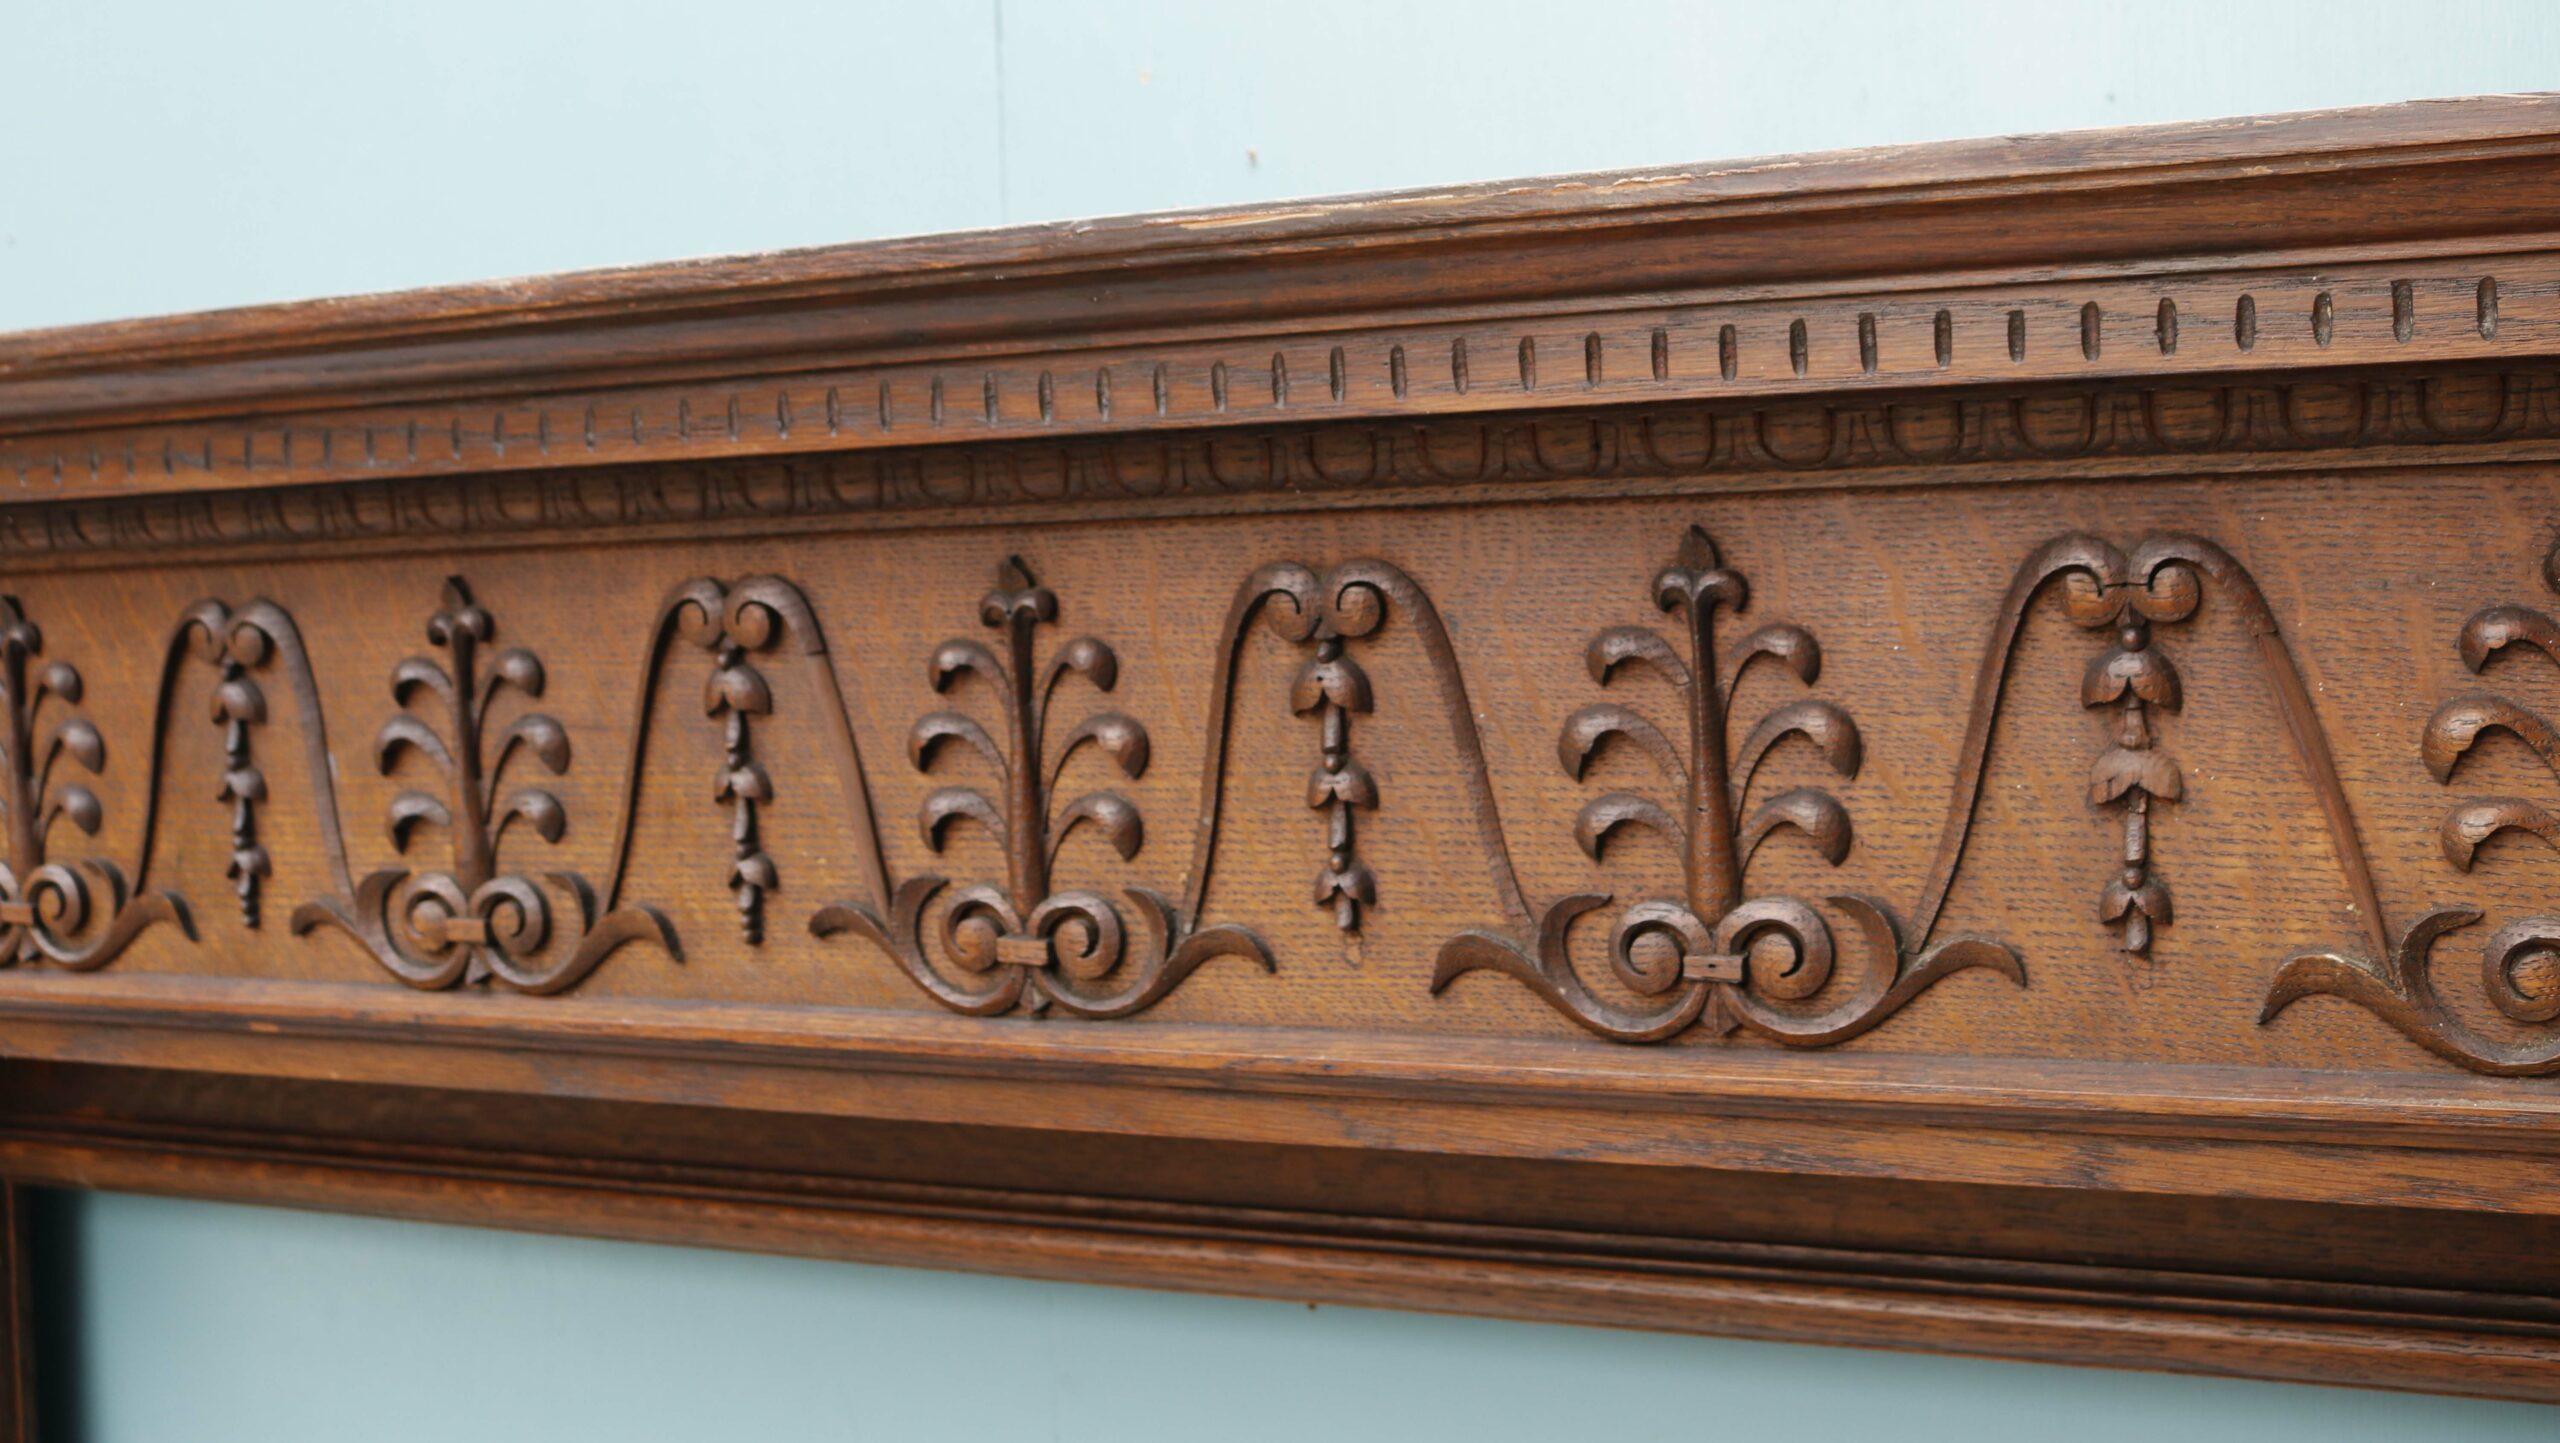 Antique Decorative Oak Fireplace. Solid carved oak with charming bell flowers and anthemion along the frieze. Supported on a pair of beautiful fluted columns.

Opening height 107 cm (42.12 in)

Opening width 110 cm (43.30 in)

Across the foot blocks